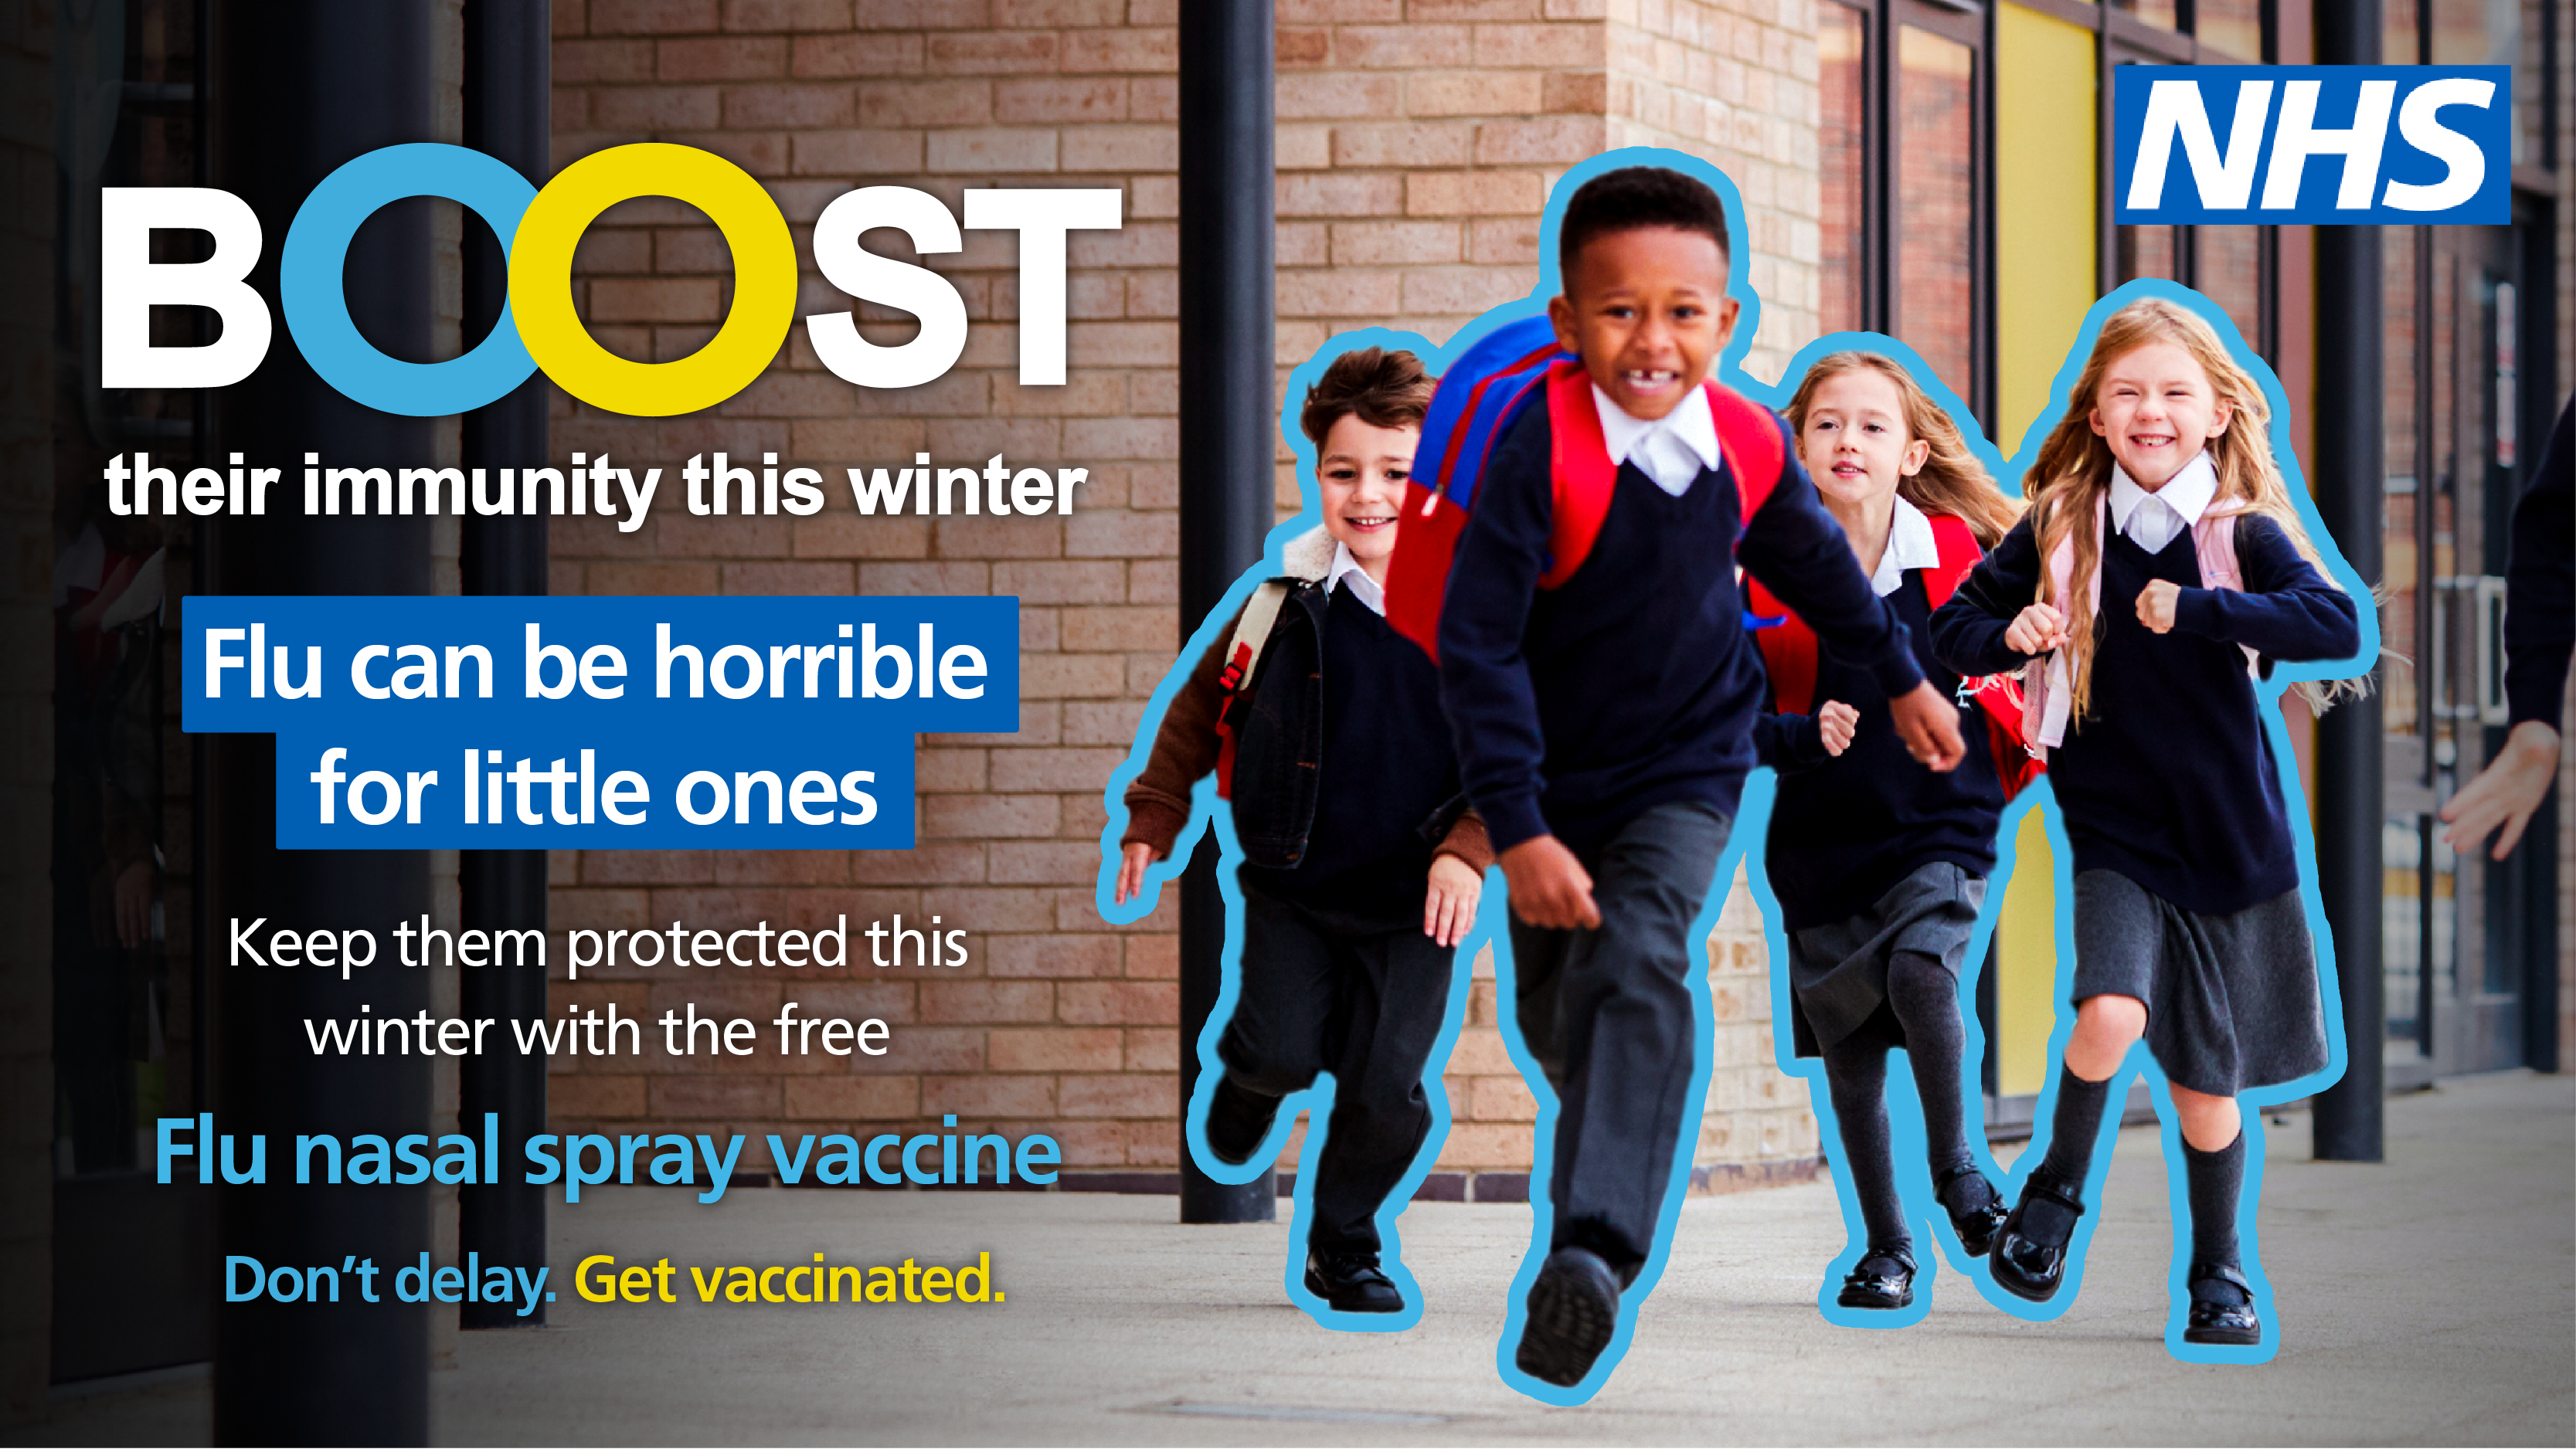 Image of young school children. Title: Boost their immunity this winter. Flu can be horrible for little ones. Keep them protected this winter with the free flu nasal spray vaccine. Don't delay. Get Vaccinated.